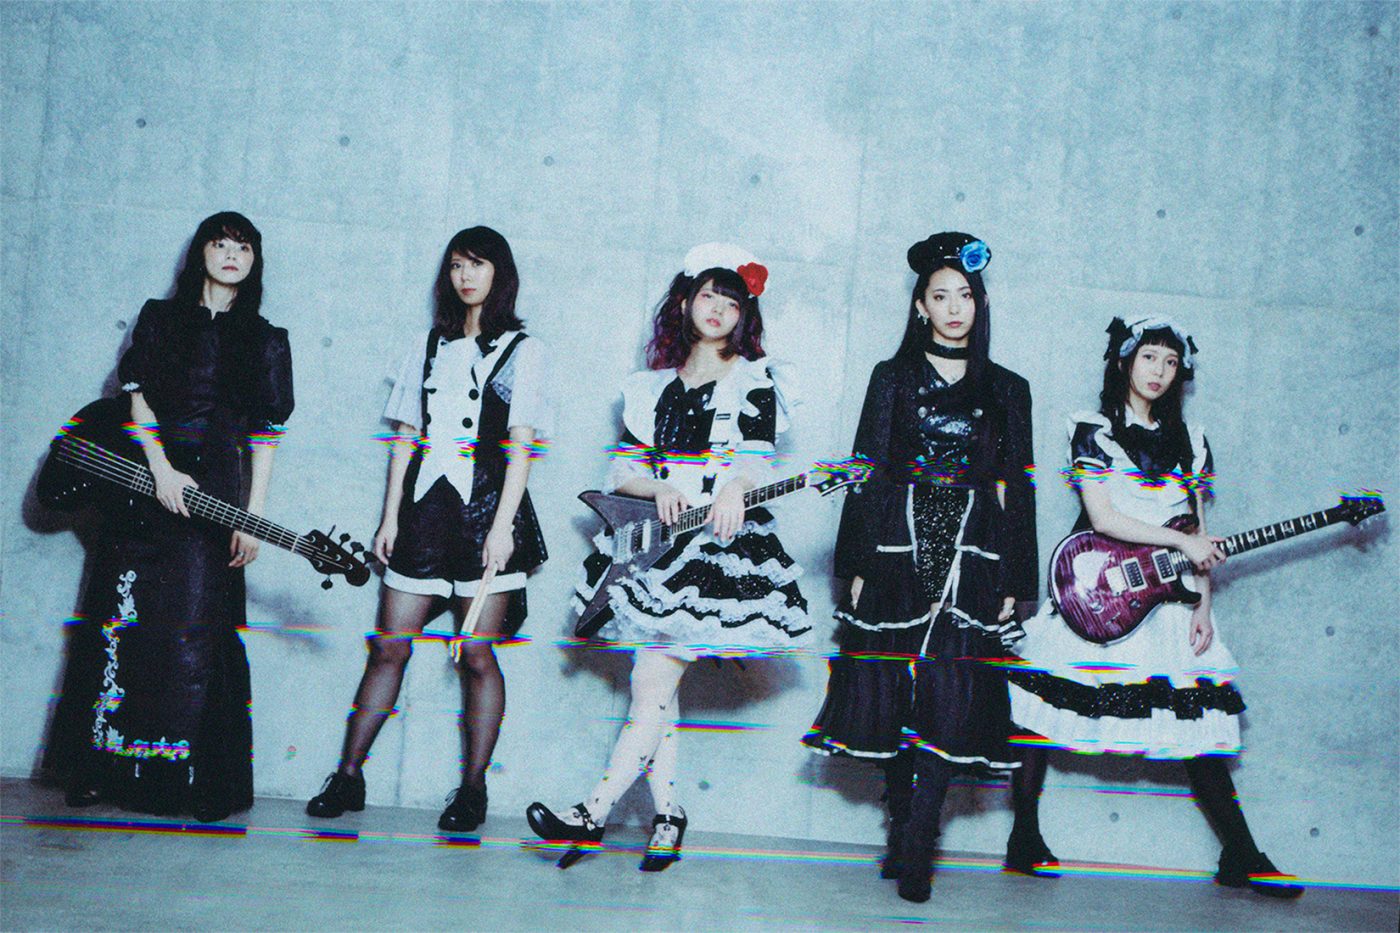 BAND-MAID、世界的ロックフェス『DOWNLOAD FESTIVAL』日本版への出演が決定 - 画像一覧（2/2）